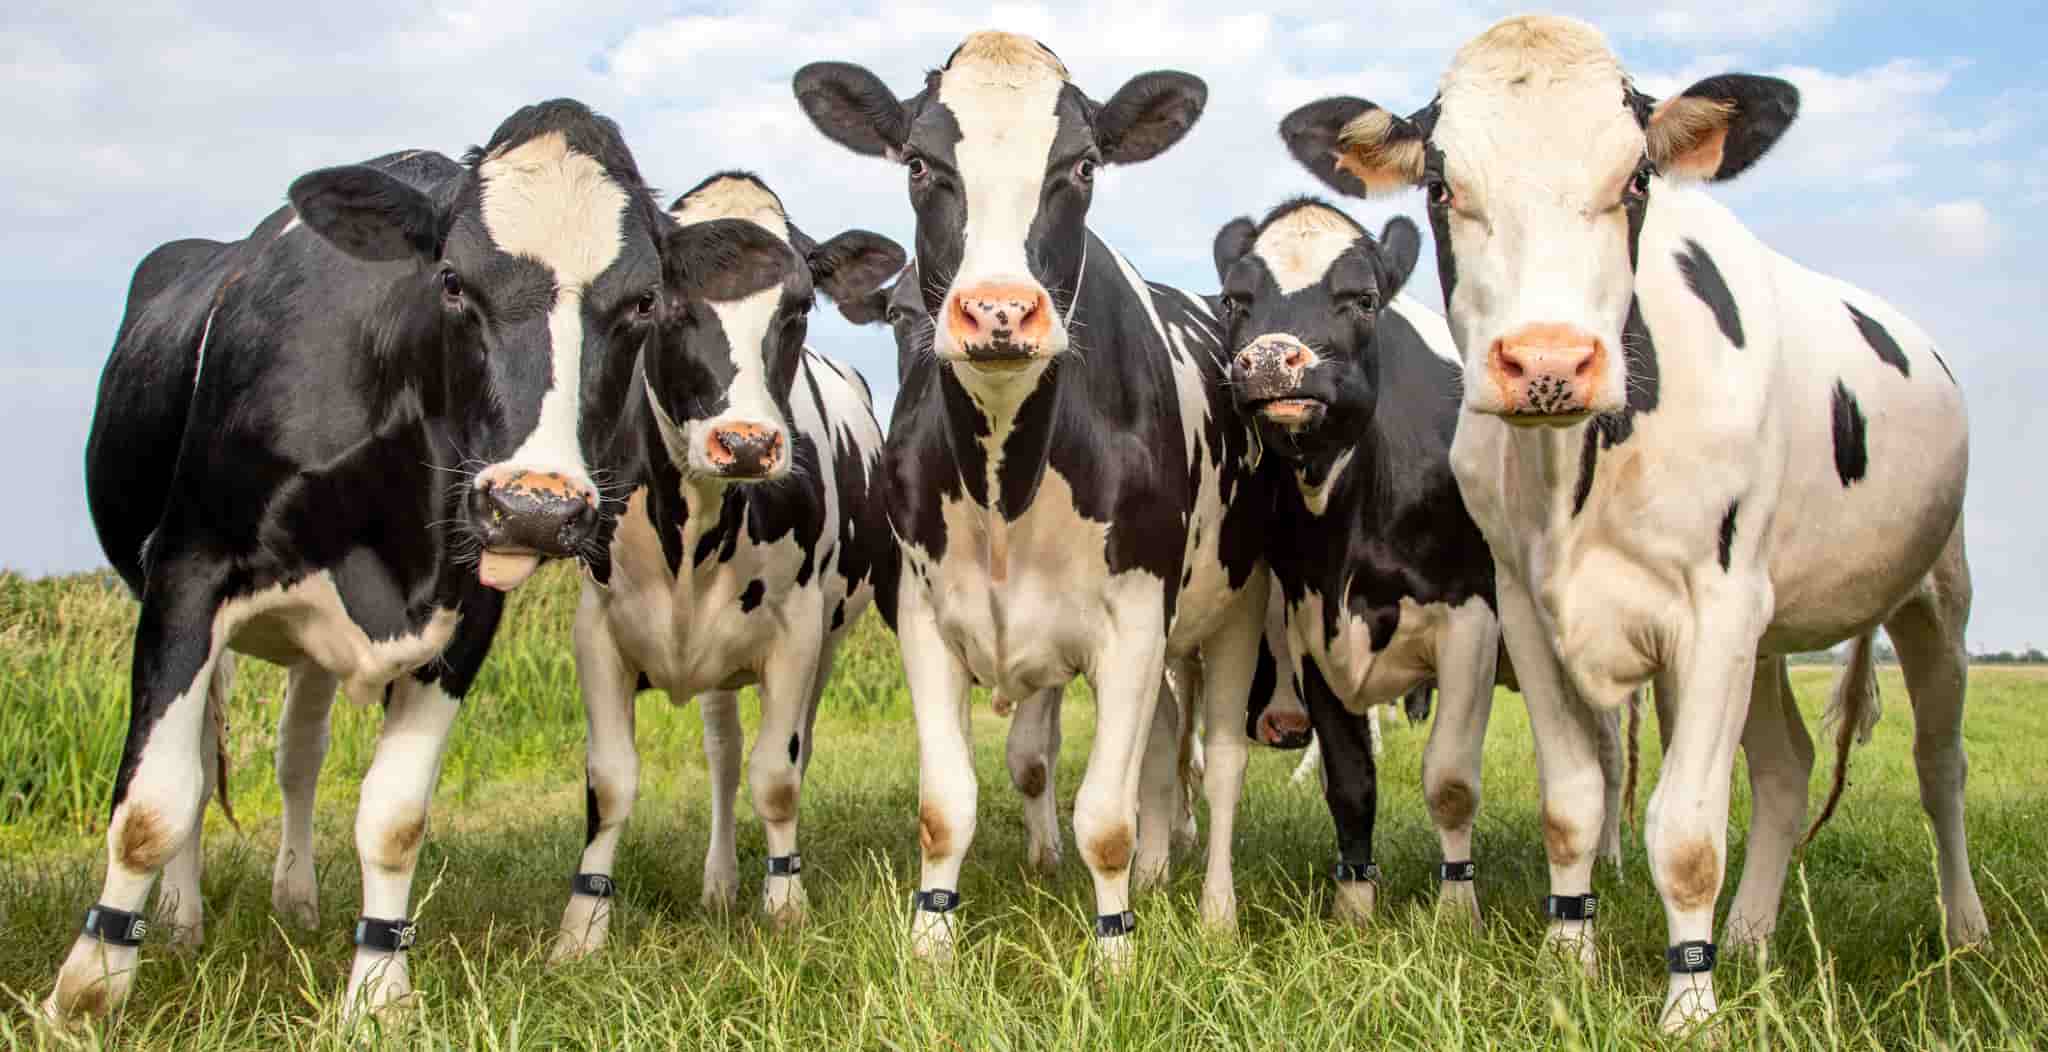 MOO streamz magnetic pain relief bands for cows cattle and calves. natural lameness support.